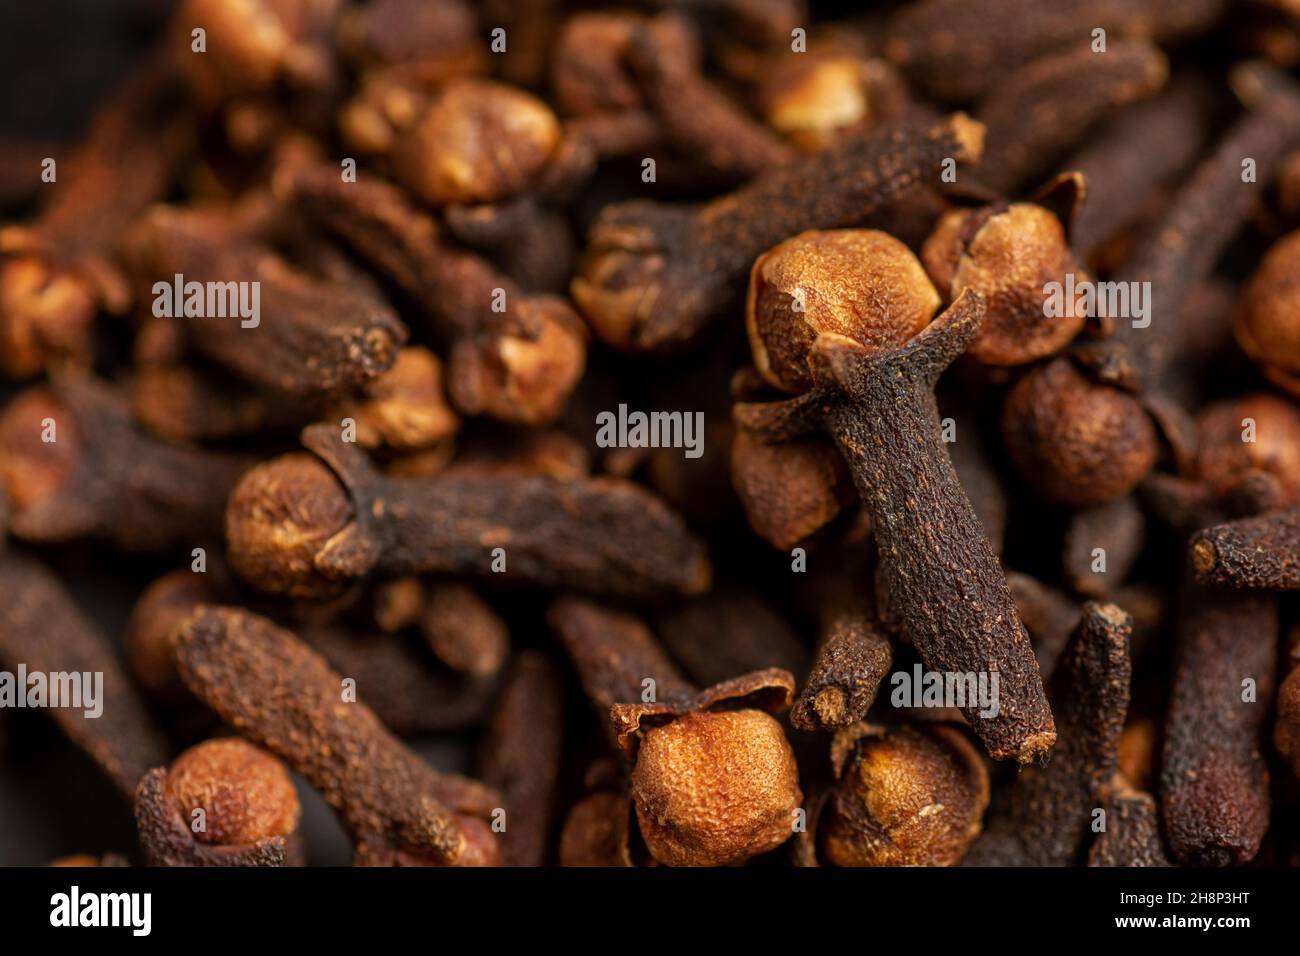 clove dried spicy herb for food aroma and natural medicine close up Stock Photo